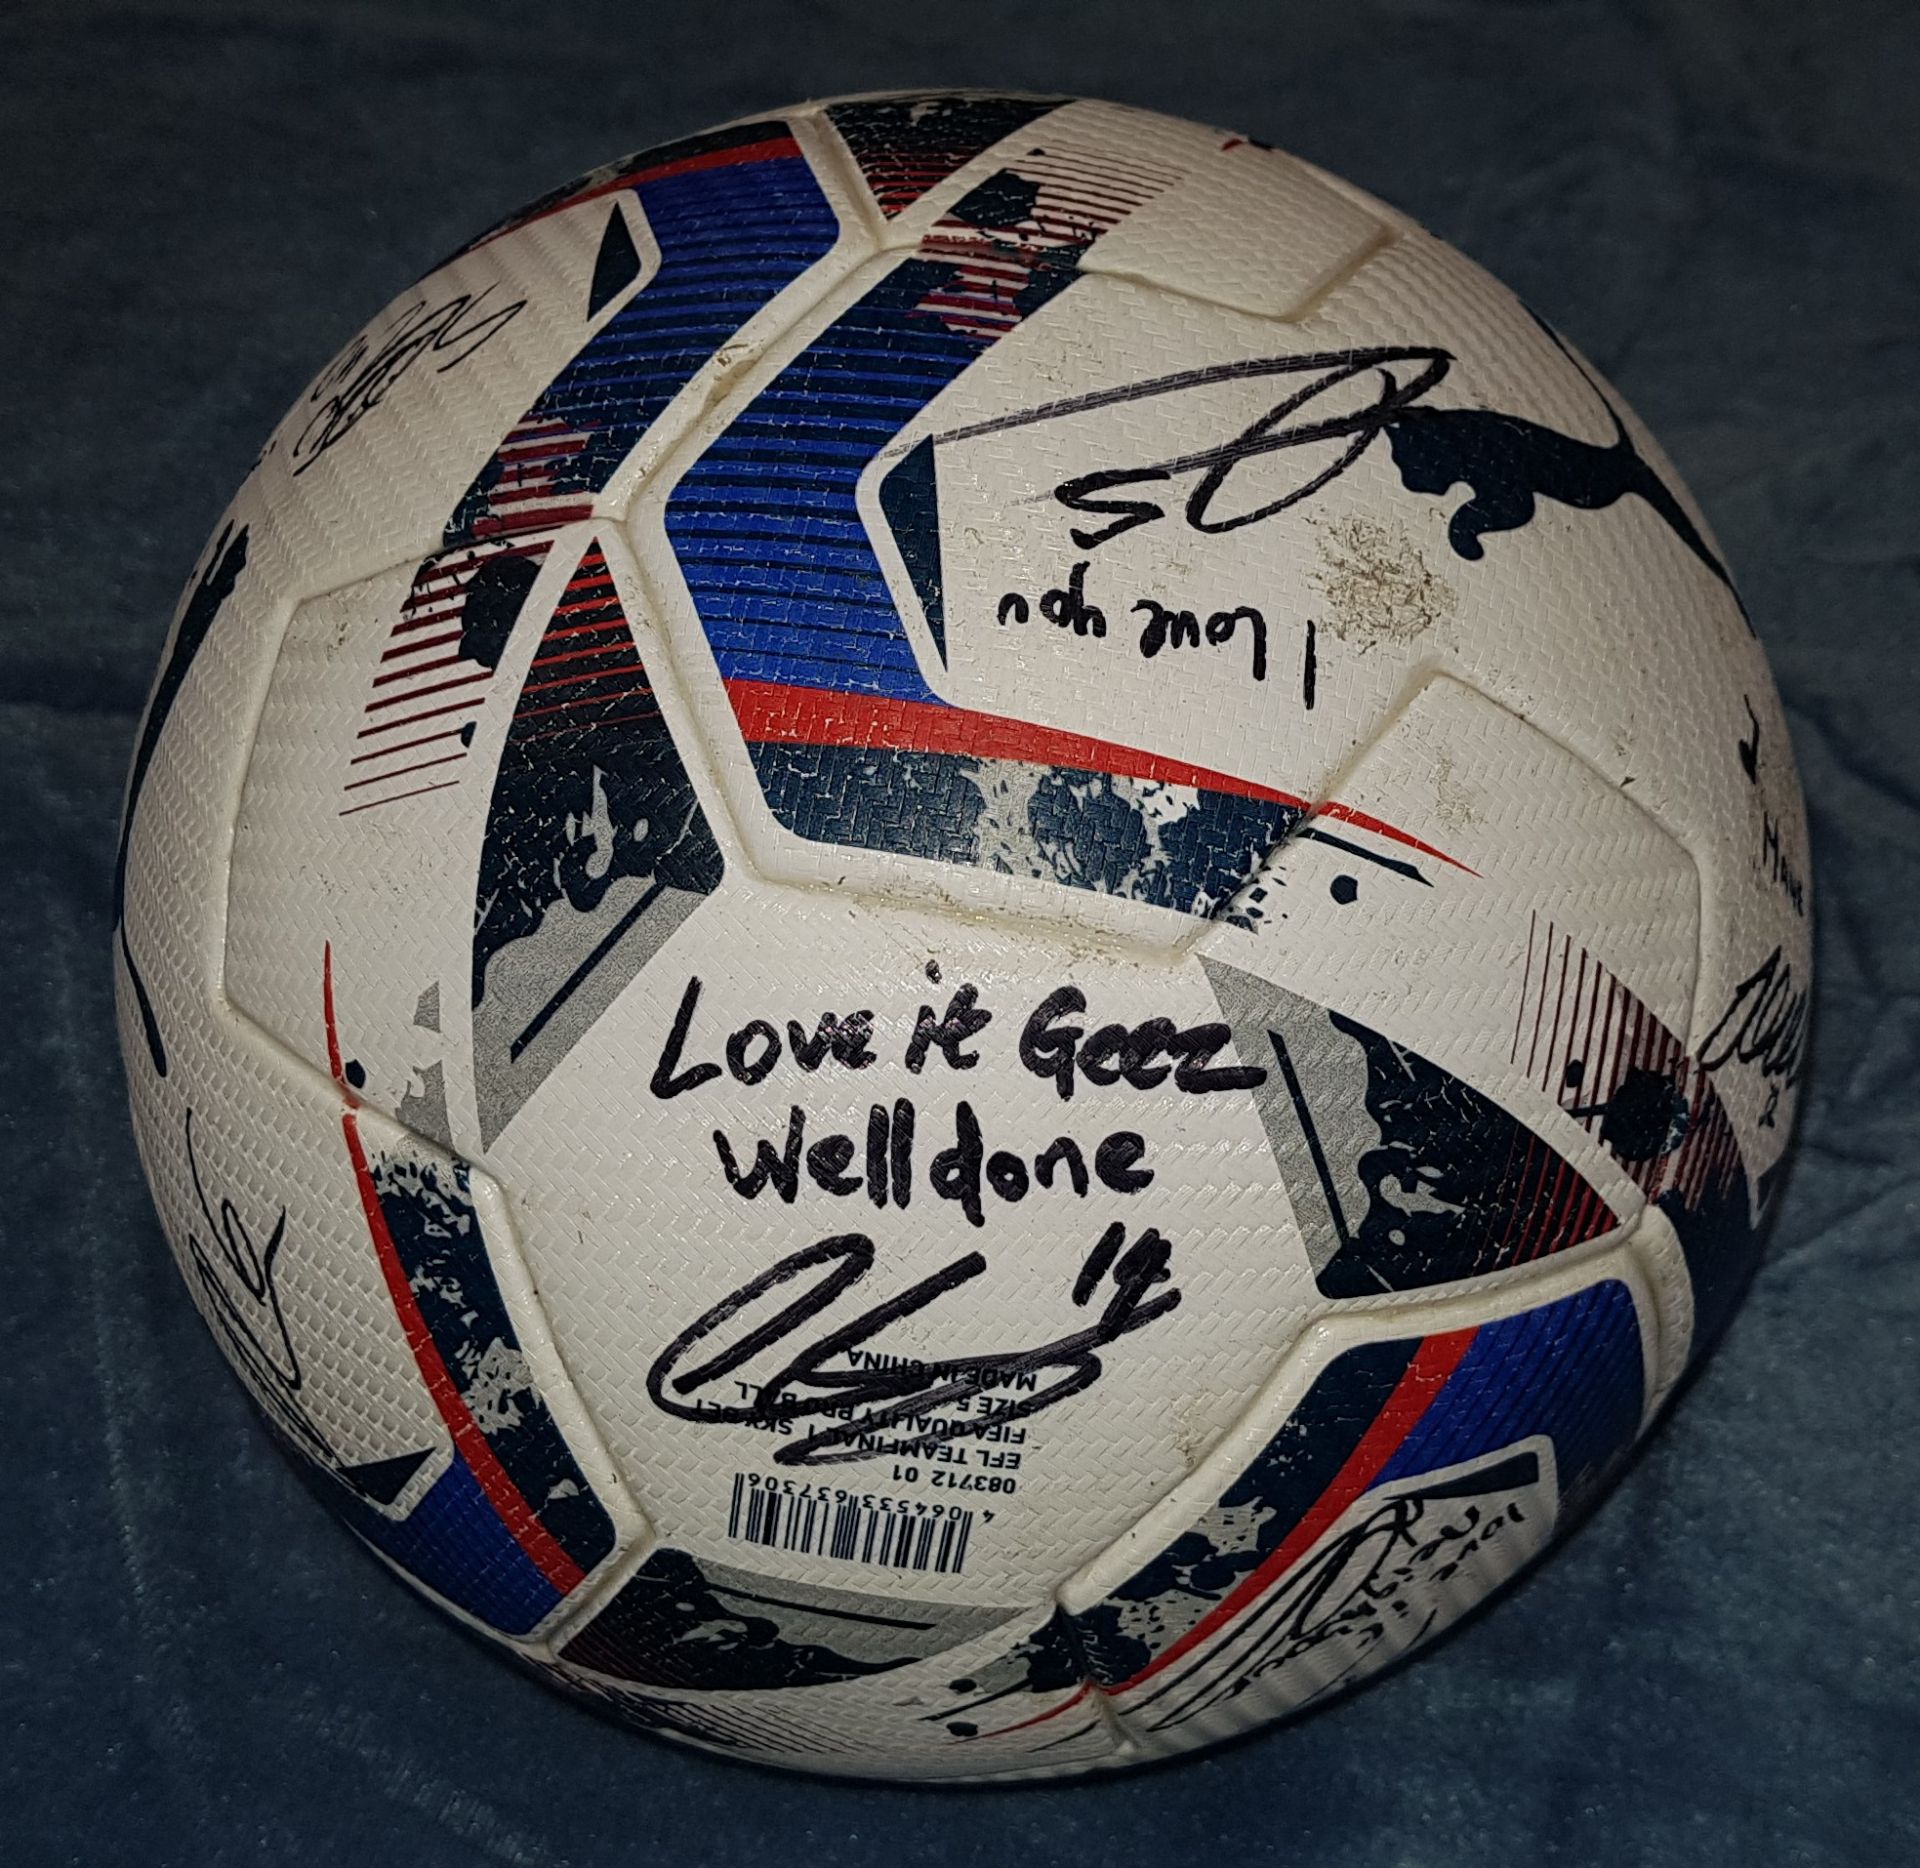 PUMA SIZE 5 FOOTBALL FIFA QUALITY PRO SKYBET EFL WITH NUMEROUS UNKNOWN SIGNATURES (SEE IMAGES) - Image 3 of 4